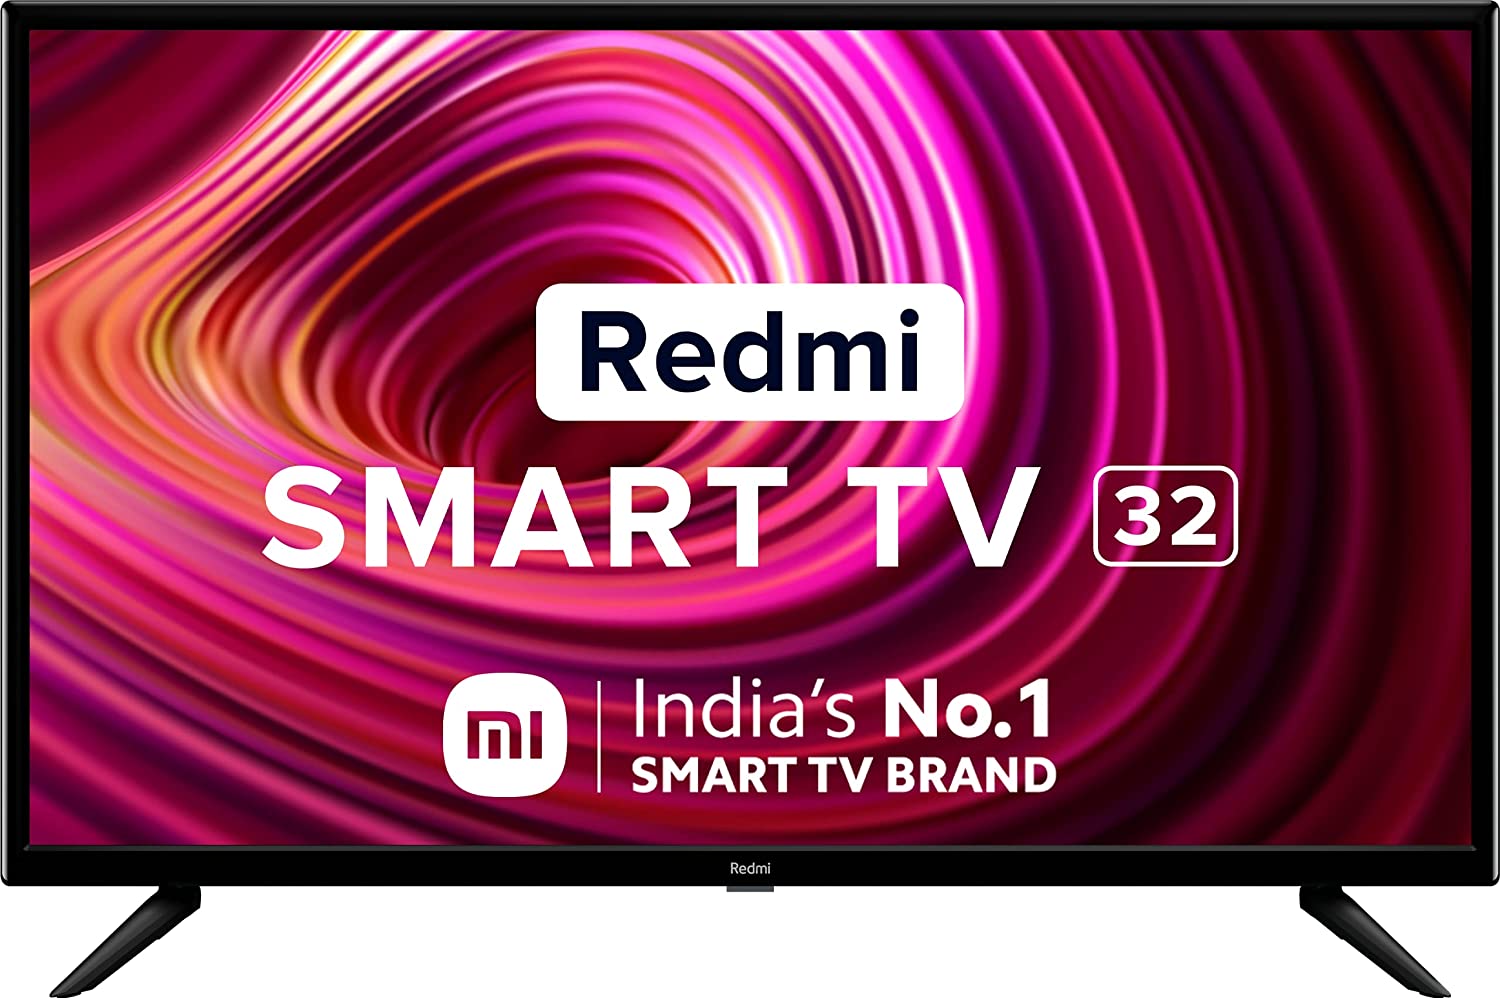 Amazon Navratri Sale: If you want to take smart TV for home or office, then avail up to 50% discount in Navratri sale running on Amazon.